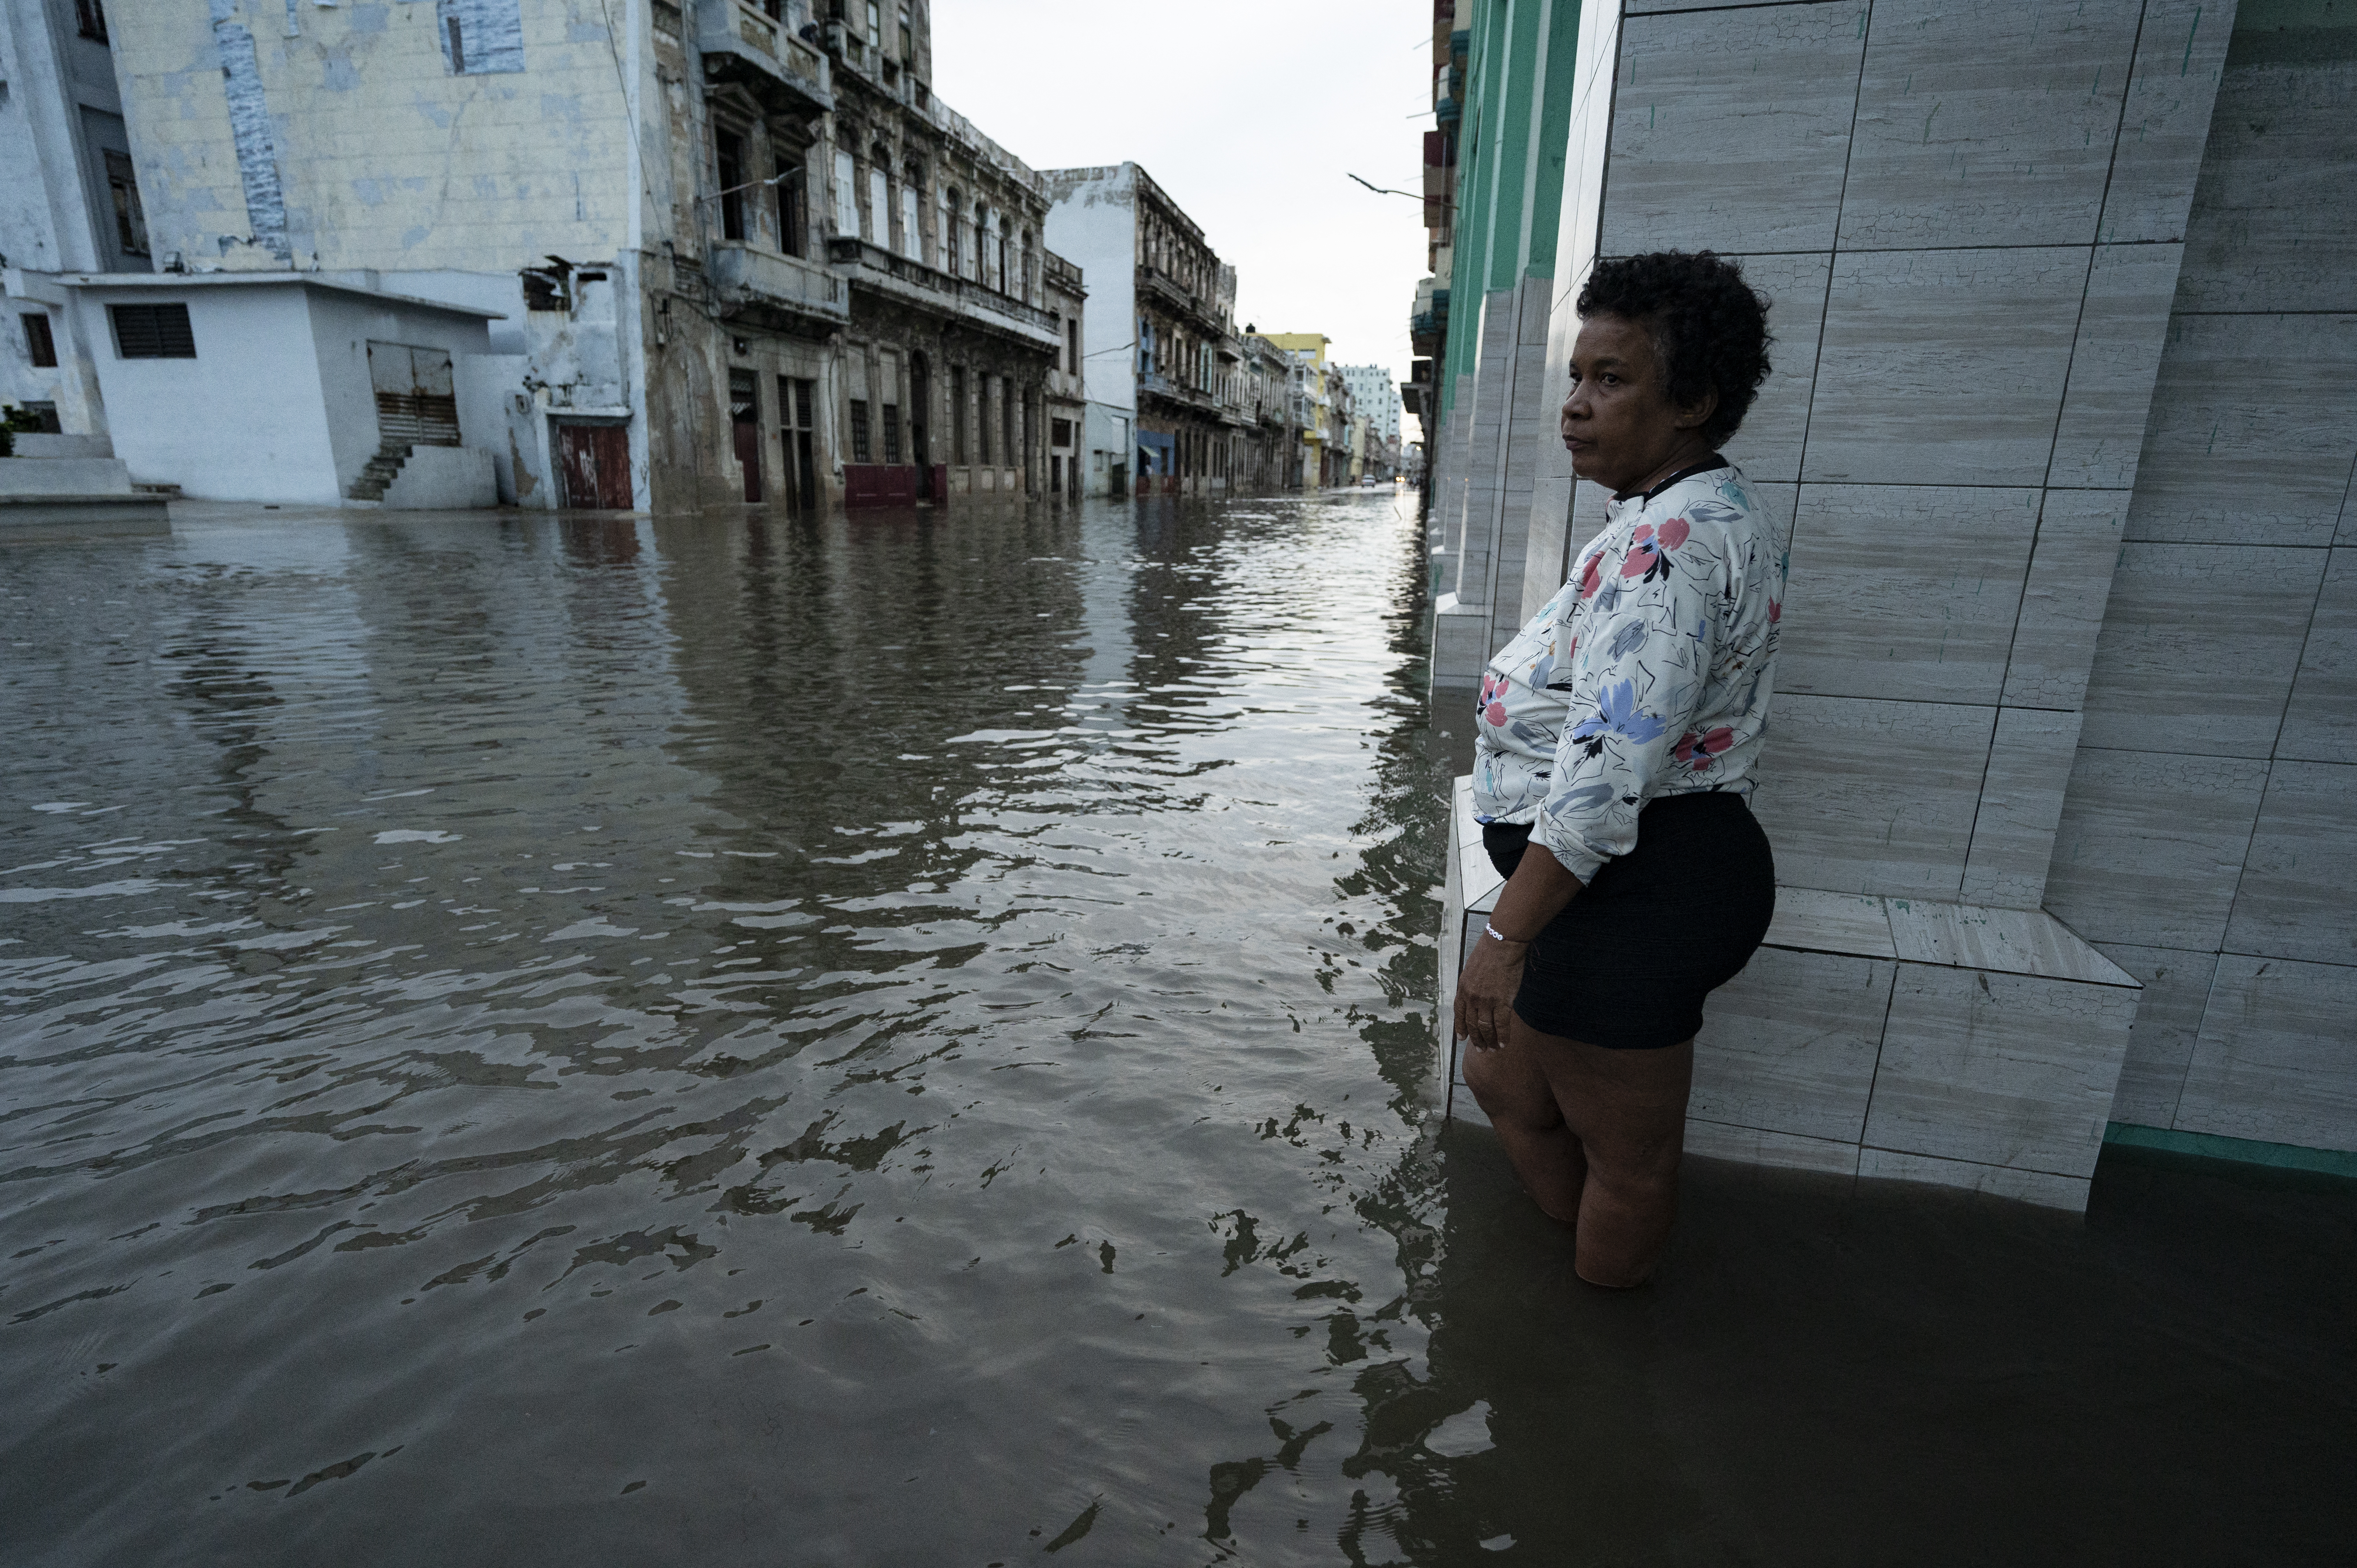 A woman stands in a flooded street in Havana, after the passage of Hurricane Ian, on September 28, 2022.  - Cuba crossed 12 hours this Wednesday "Zero power generation" After the passage of the powerful Cyclone Ian, due to failures in the National Electricity System (SEN) connections.  (Photo by Yamil Laj/AFP)